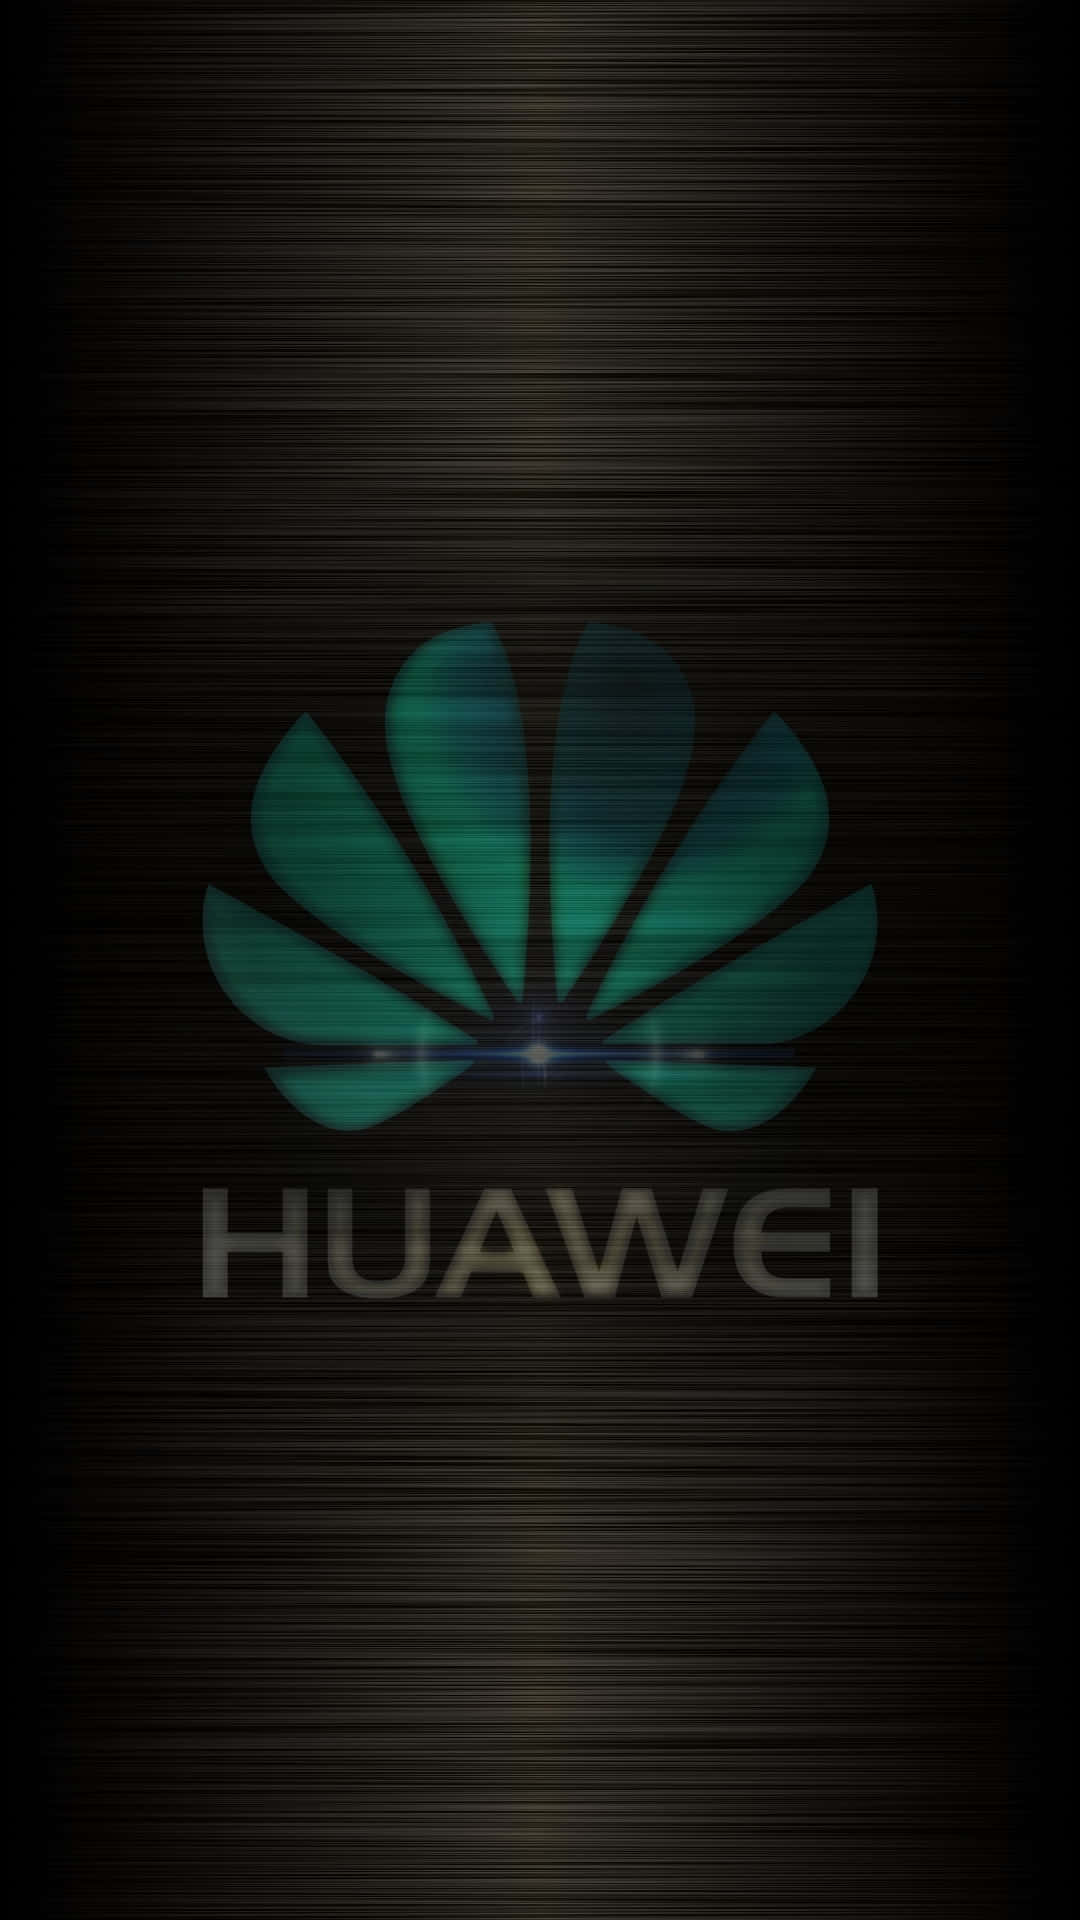 "Latest Smartphones from Huawei - Ready to Take Over the Market"